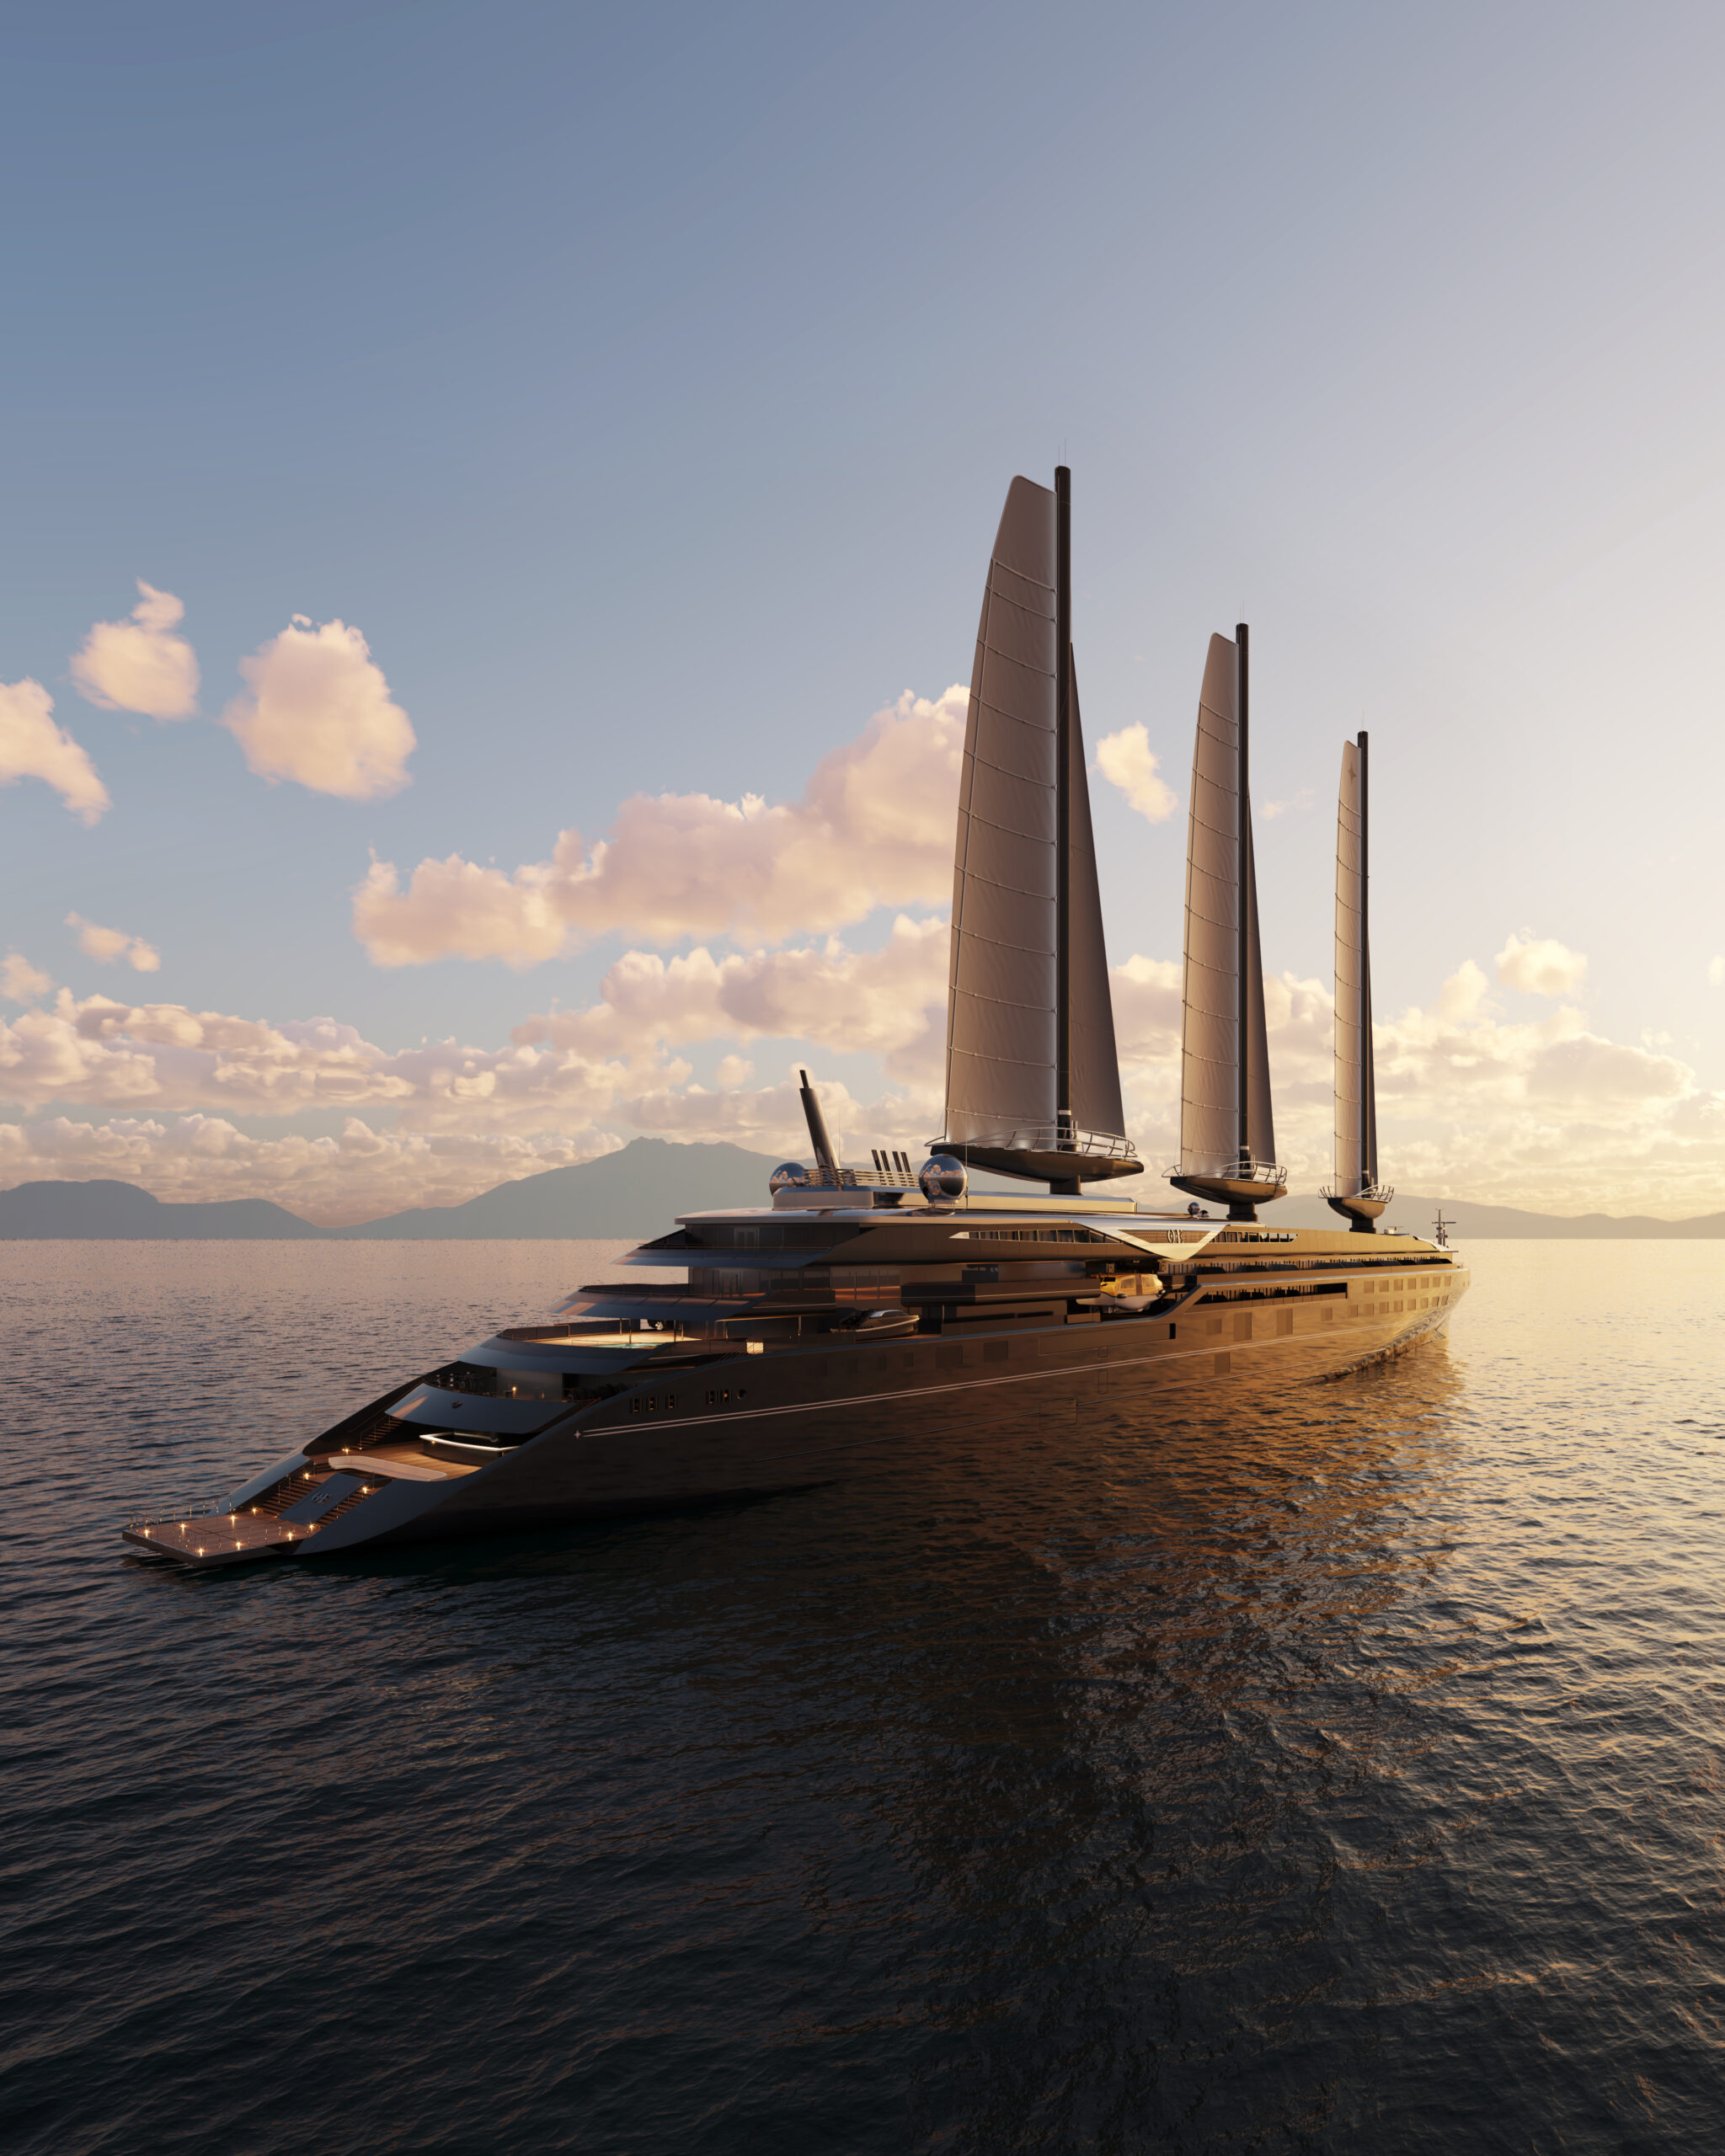 Taking on the seven seas: Celebrity luxury yachts of our dreams